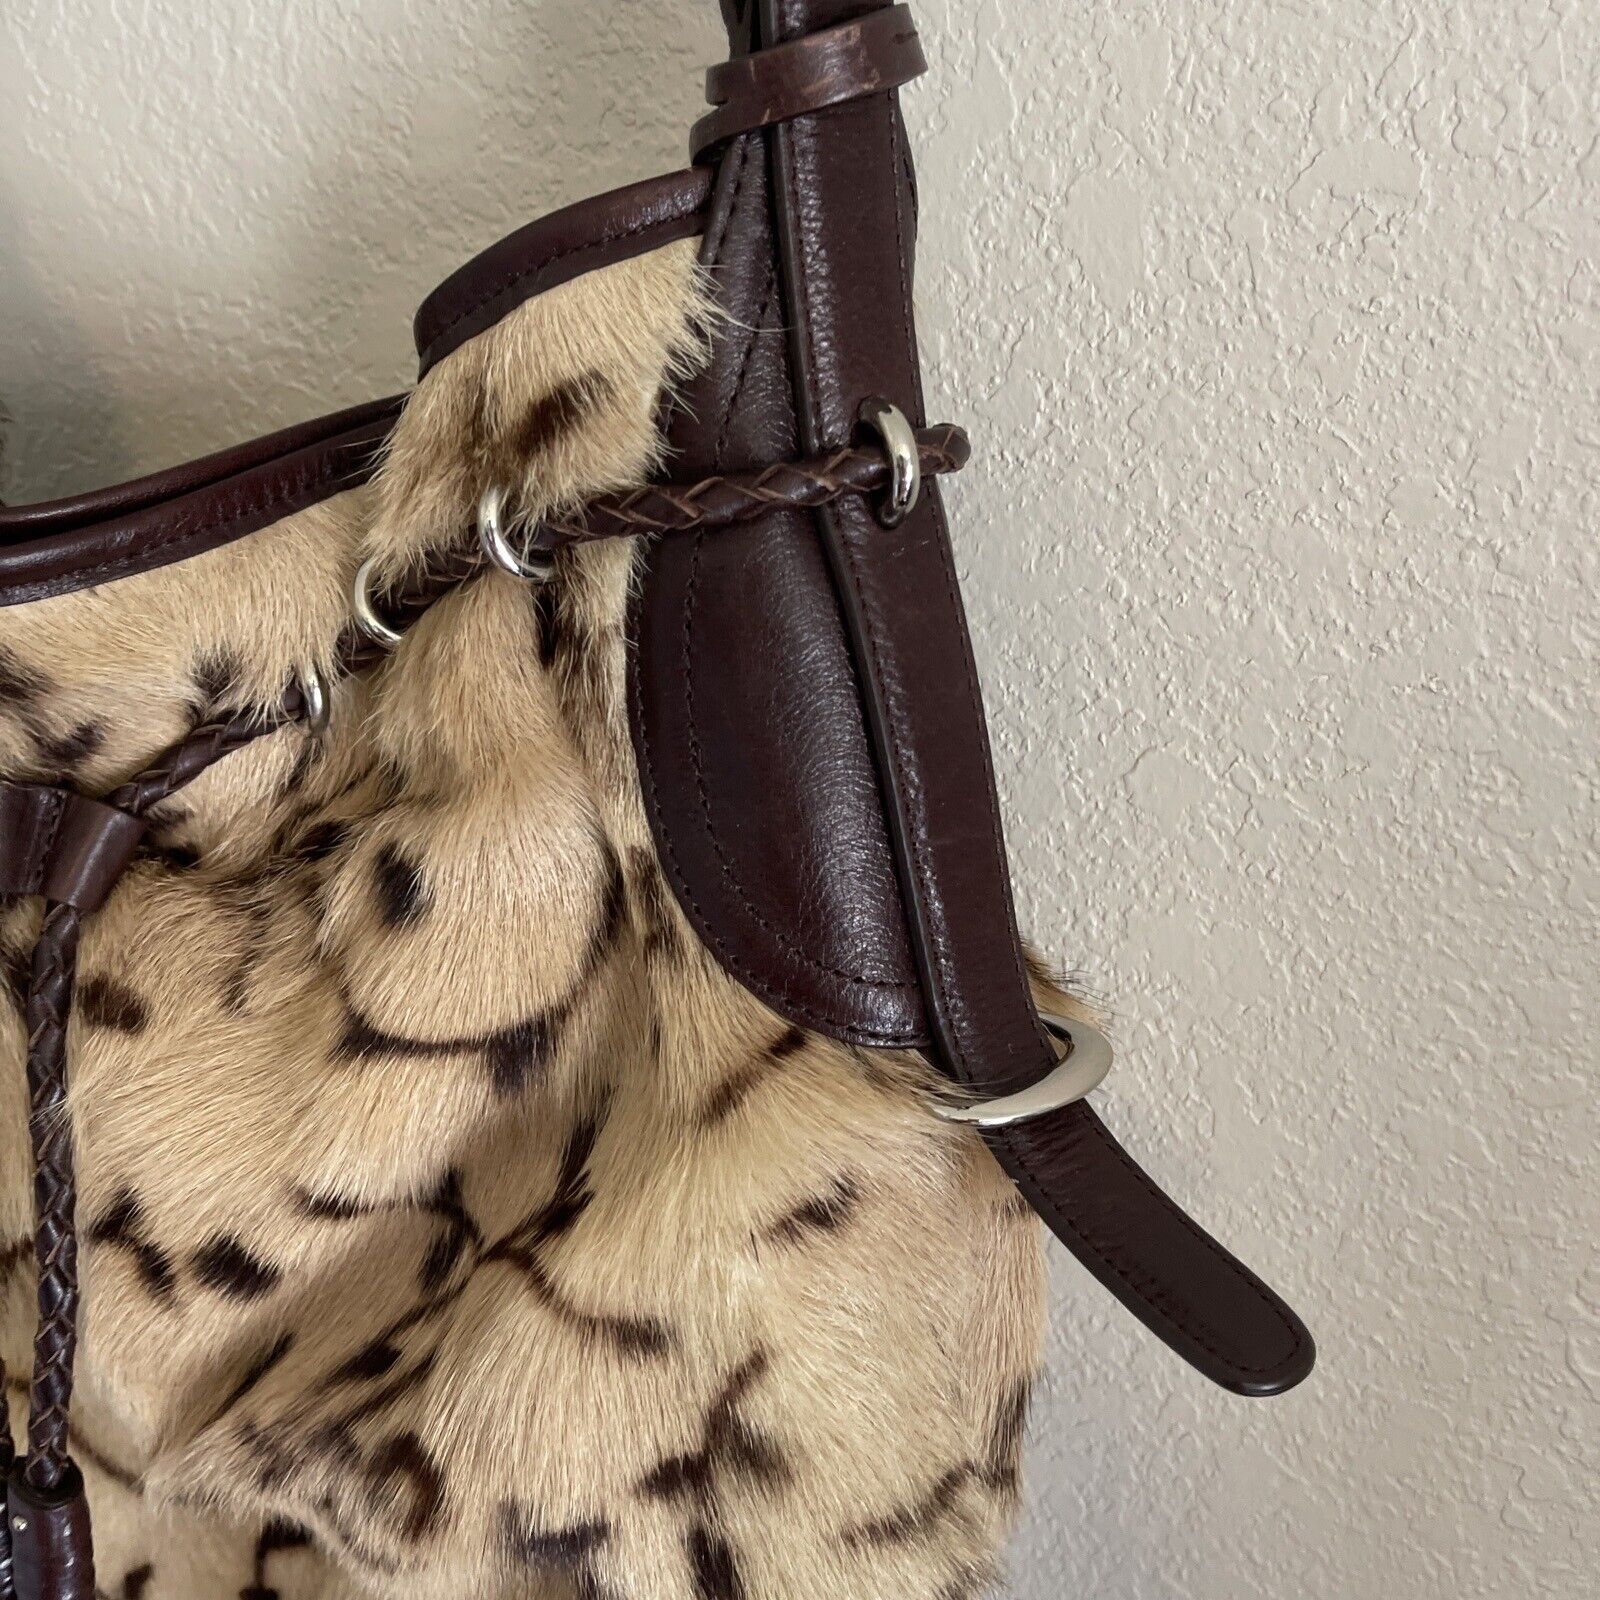 Vintage DKNY Purse The Changing Room Faux Fur - image 5